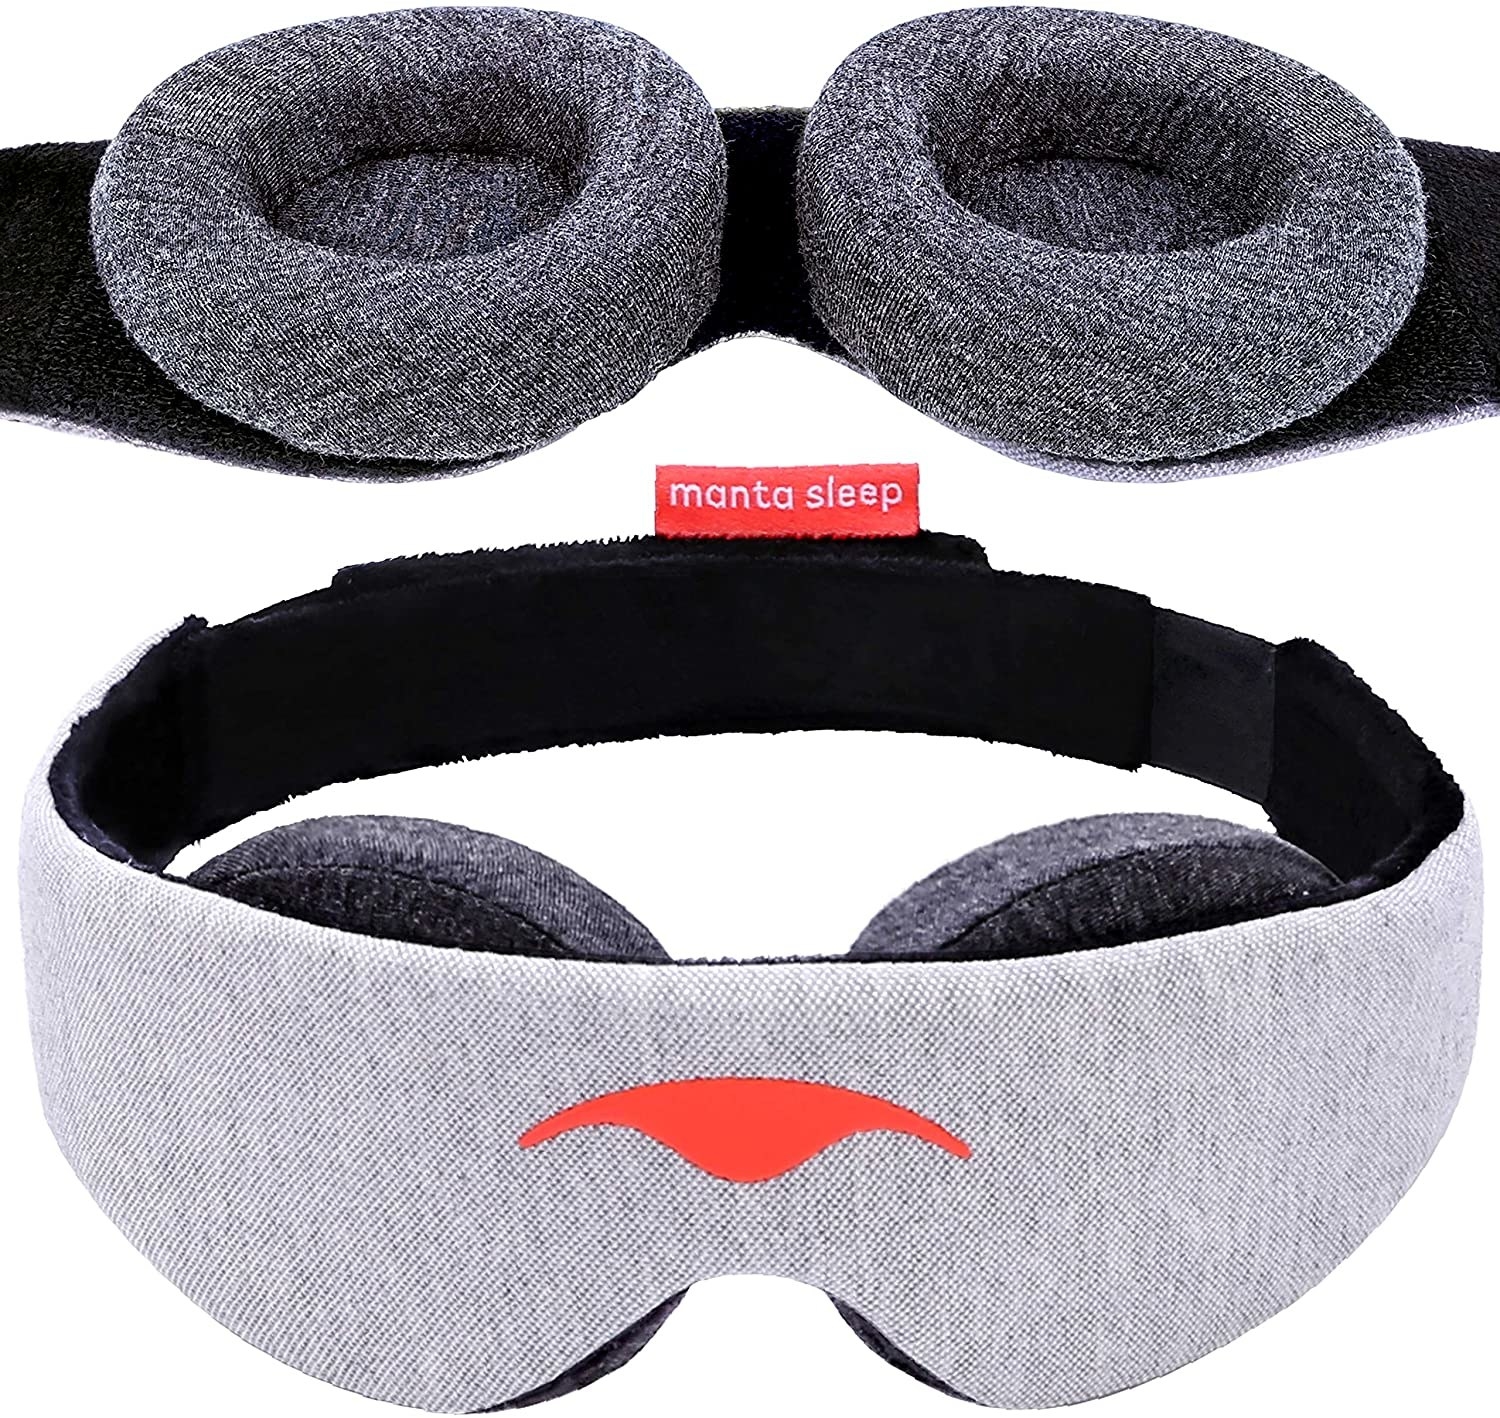 The mask, which in addition to a classic sleep mask shape, has oval-shaped hollow cushions for each eye